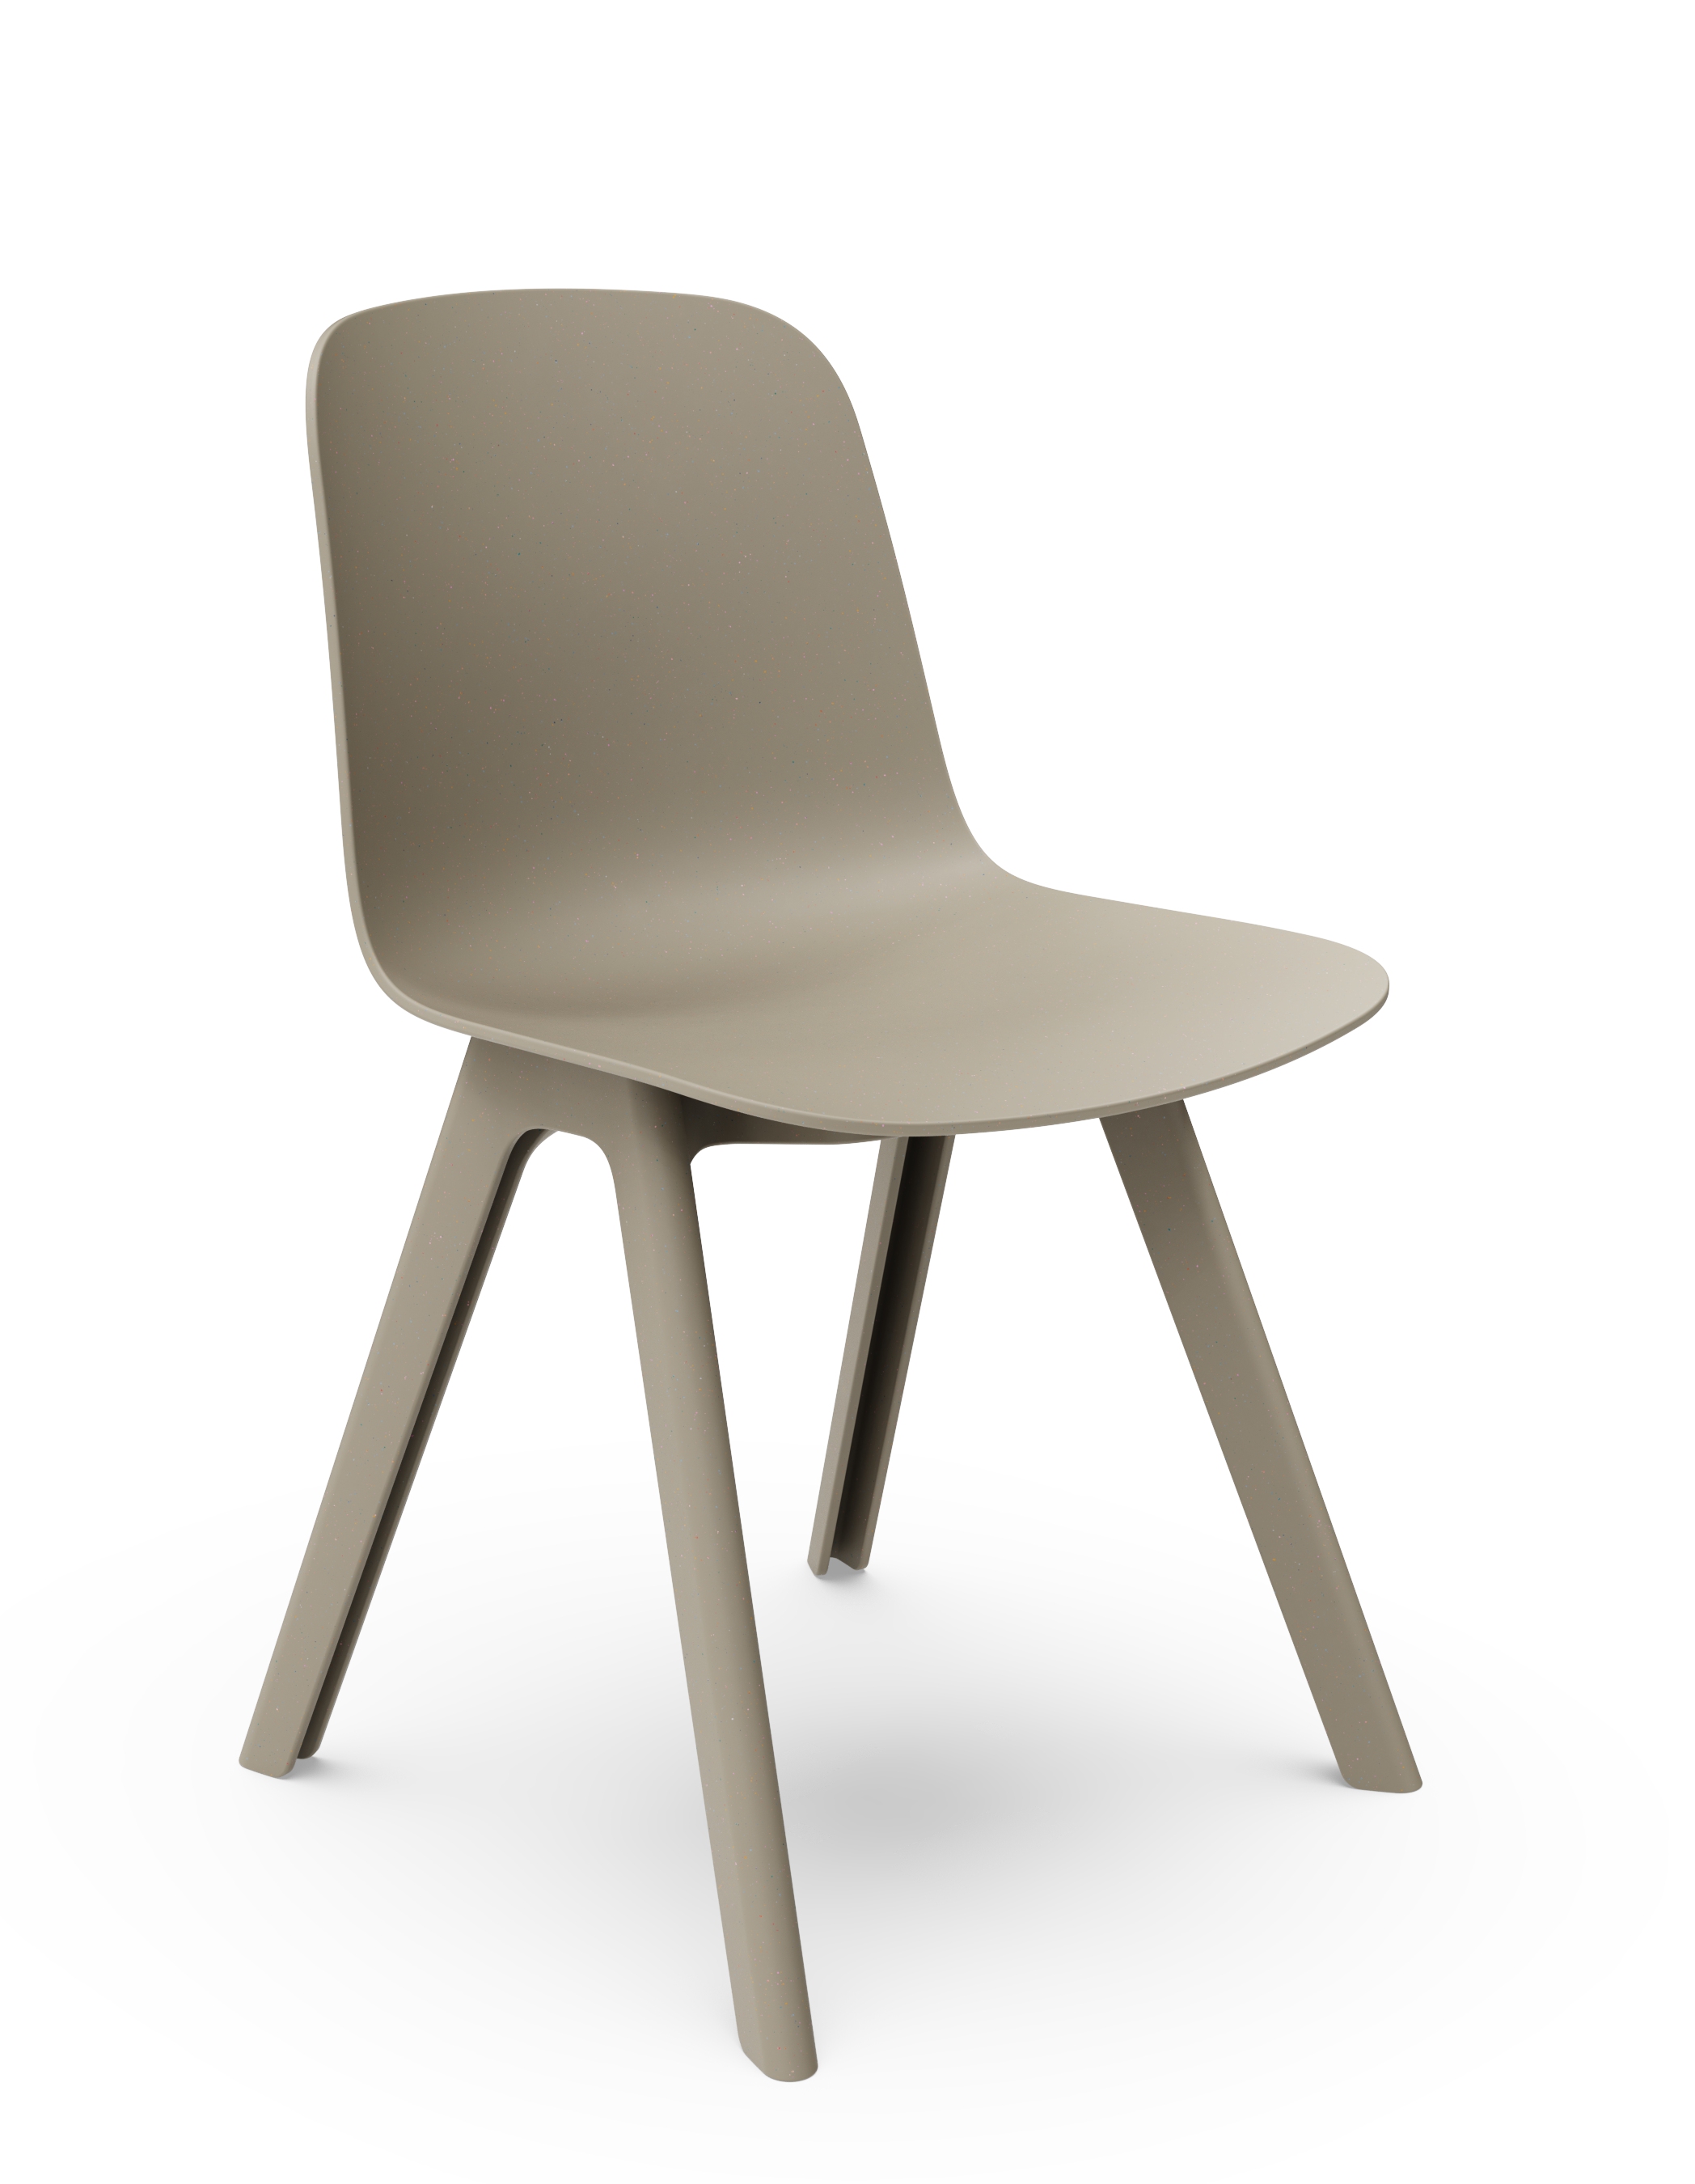 WS - Moto Side Chair - 4 Leg Plastic Base - Warm Grey - Front Angle